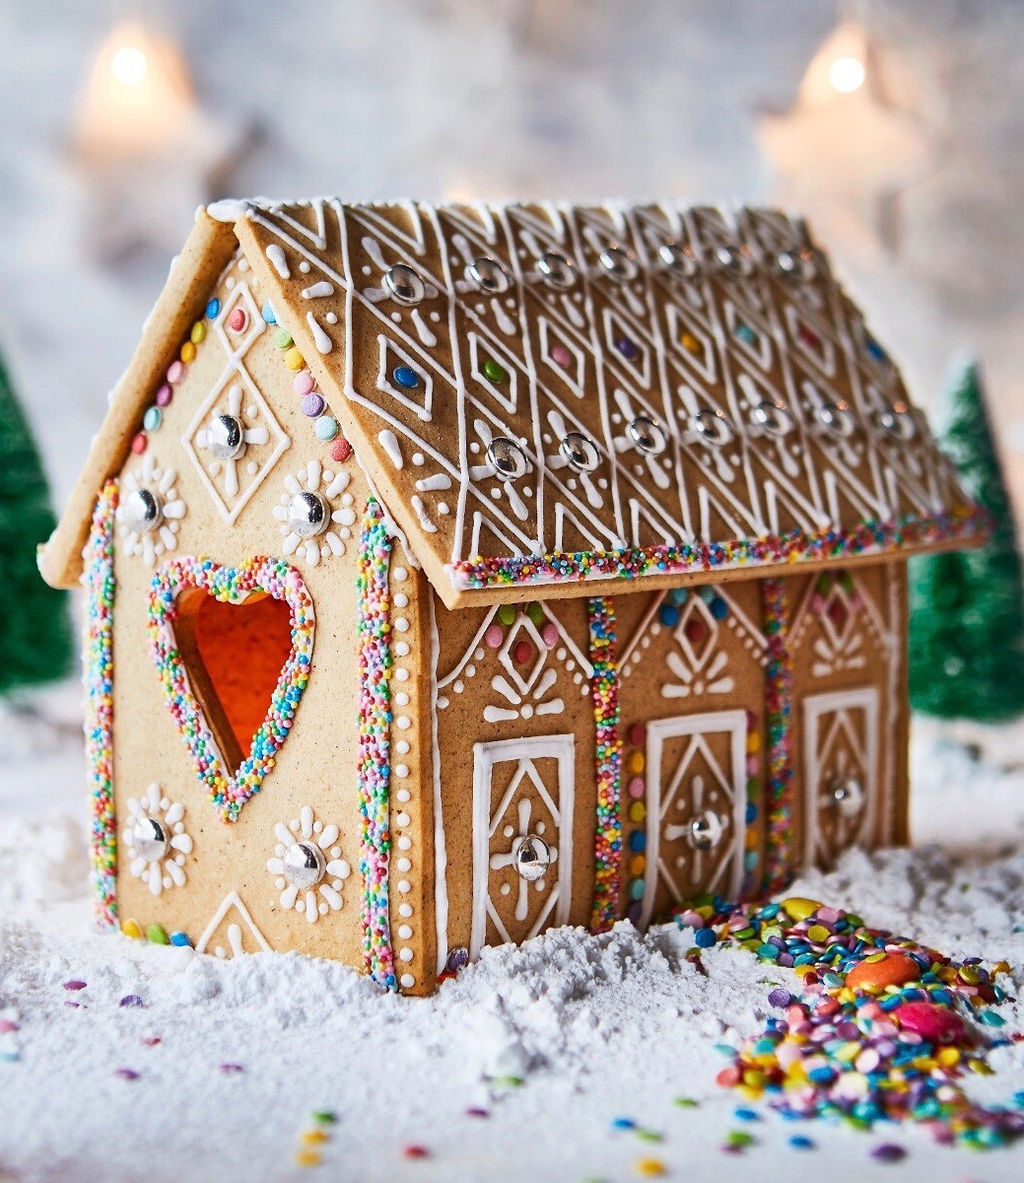 Gluten Free Gingerbread Houses